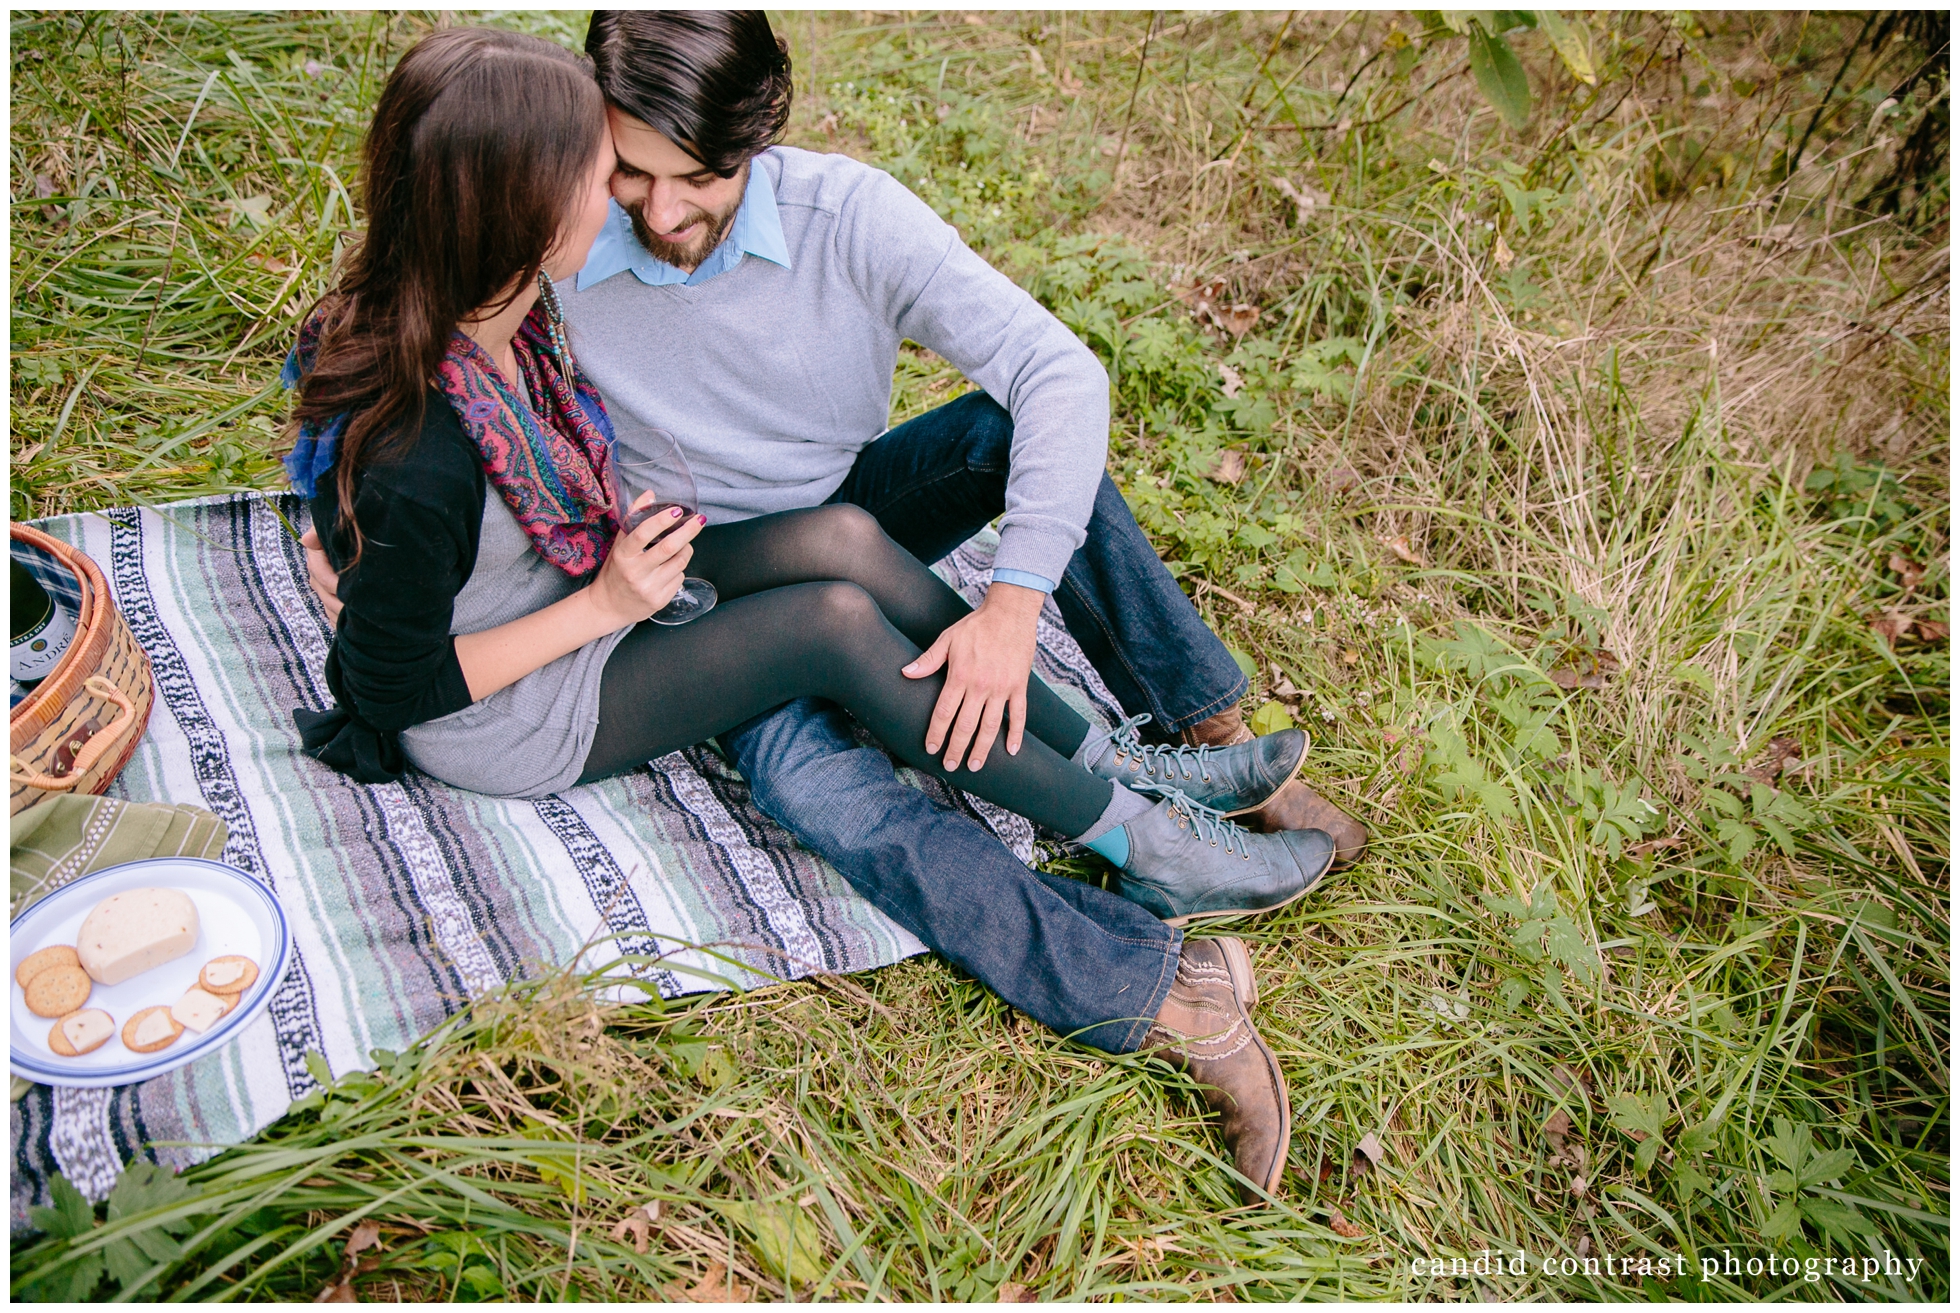 outdoor dubuque iowa picnic and wine engagement photos, iowa wedding photographer candid contrast photography 